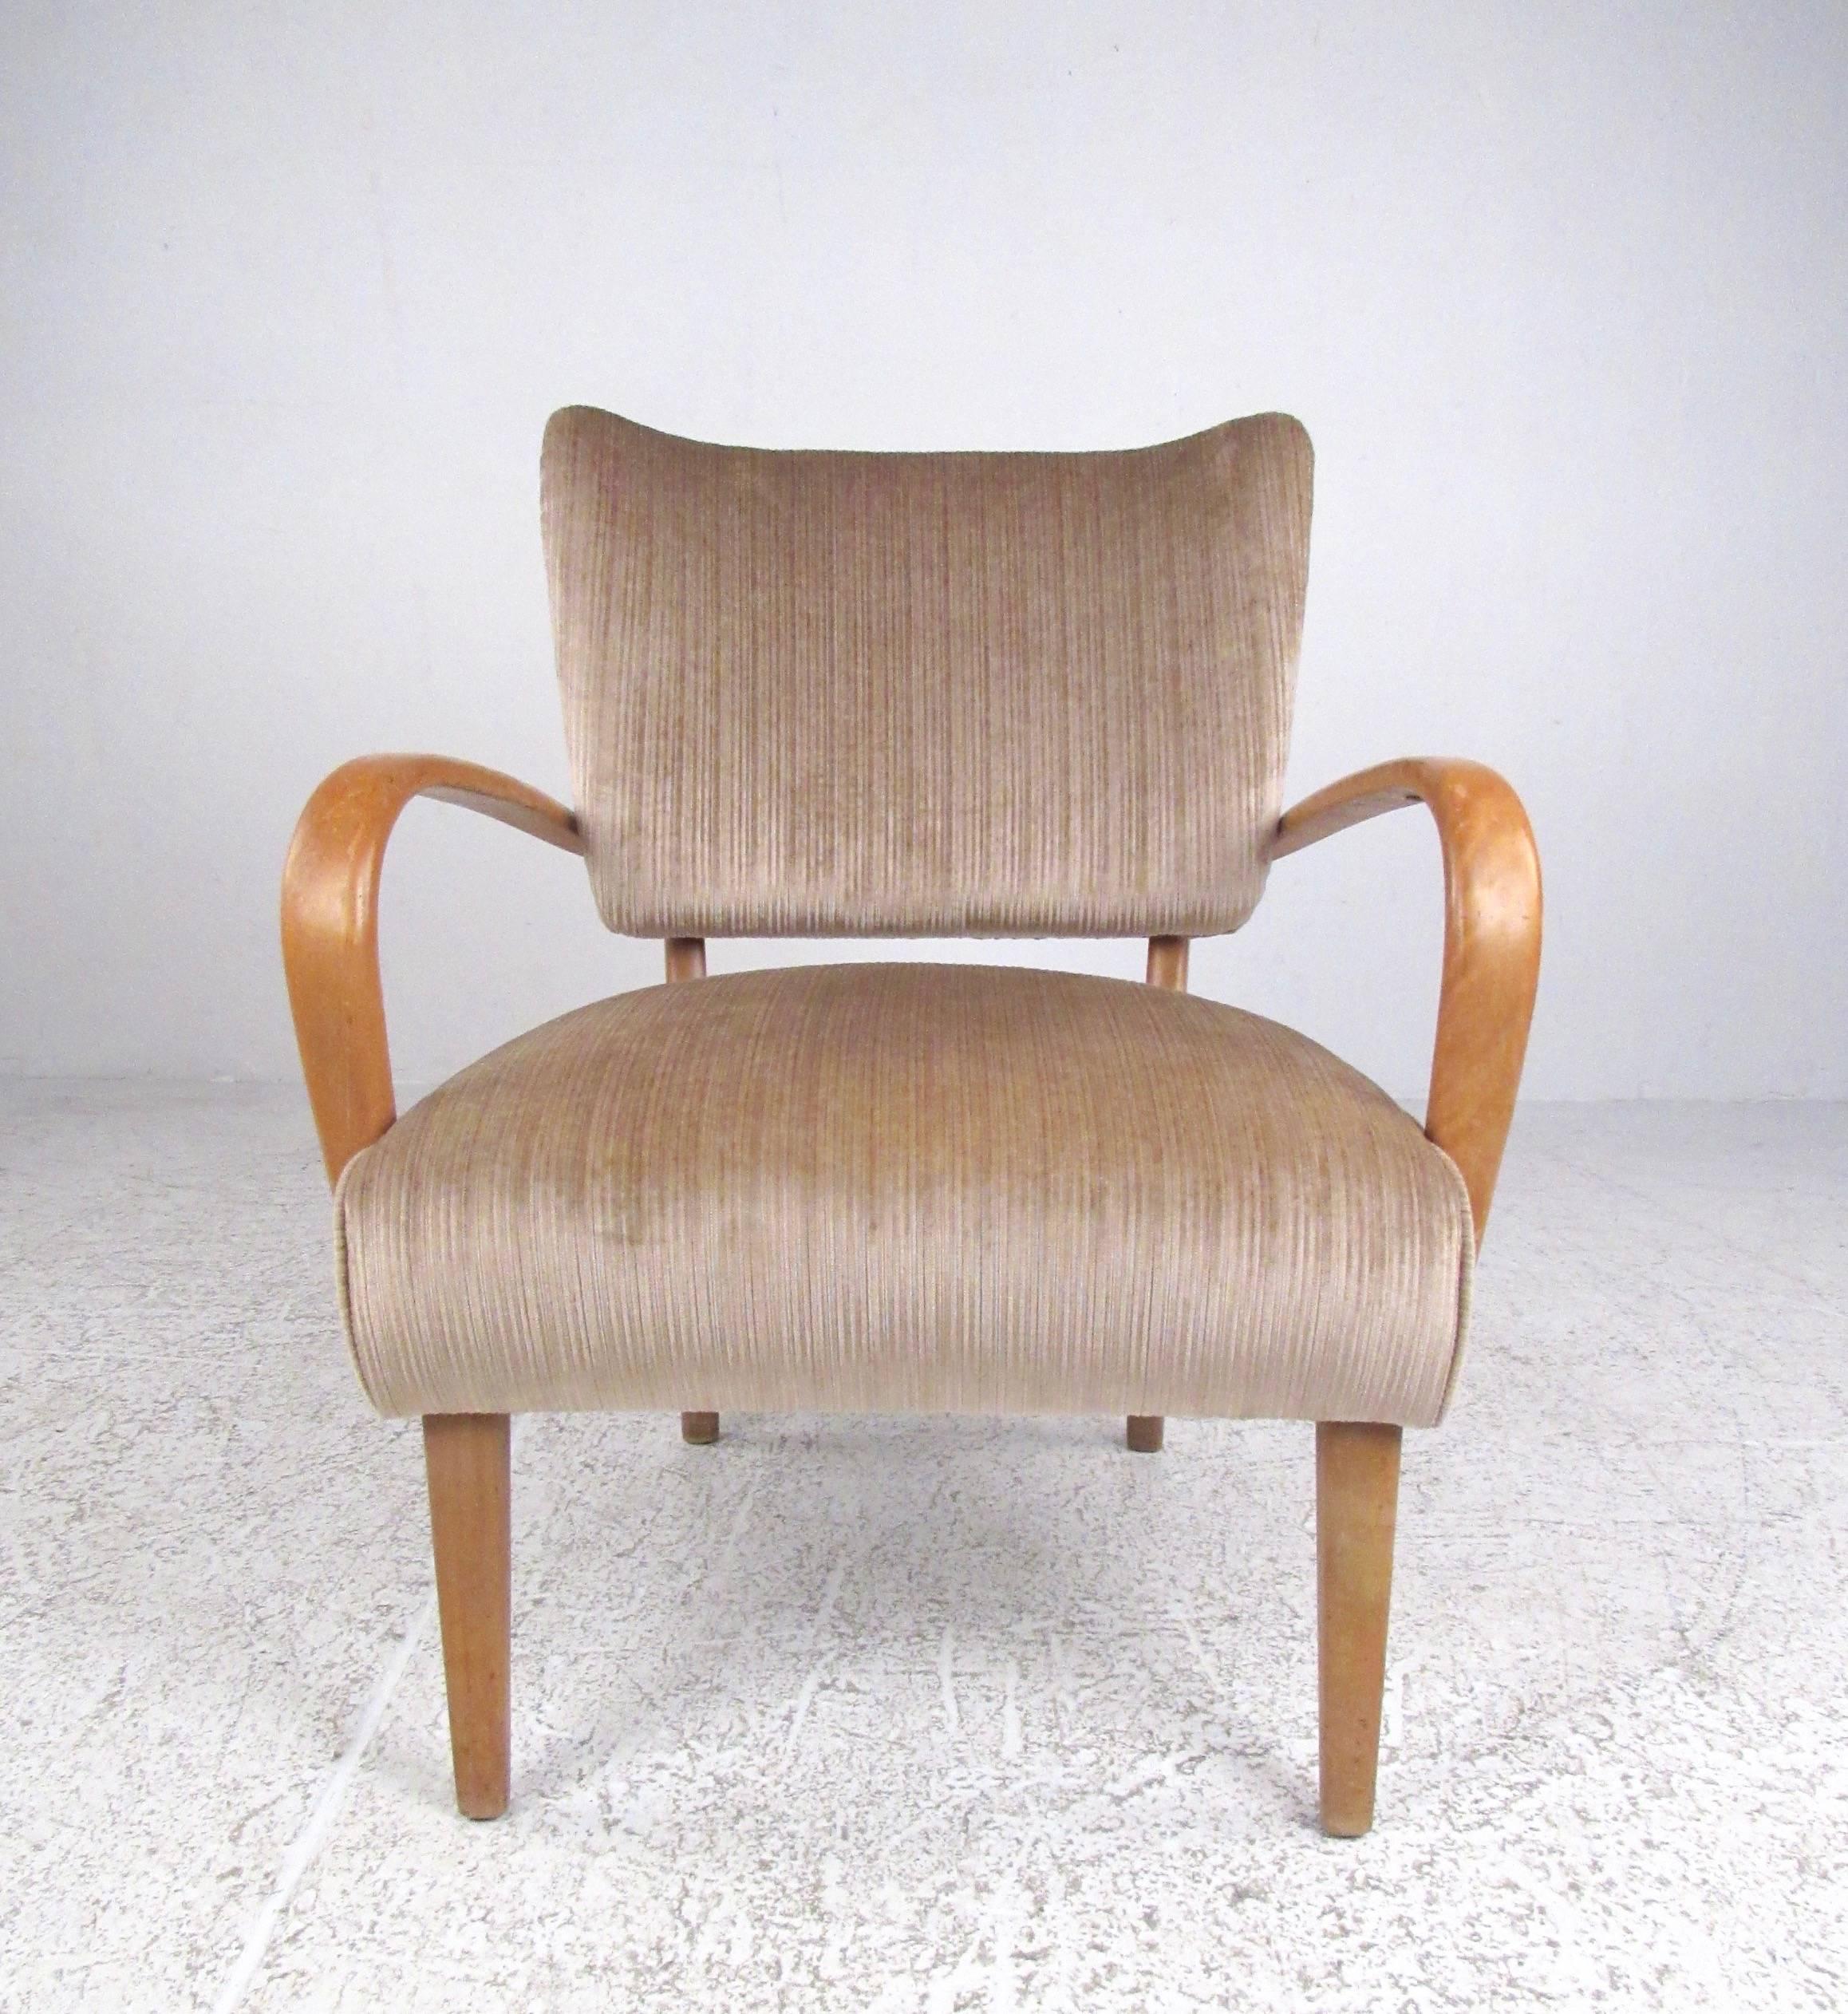 This stylish Italian modern style armchair features sculpted hardwood frame with plush upholstered seat and back. Vintage covering, stylish tapered legs, and unique Mid-Century Modern appeal makes this a perfect sitting chair for home or office,